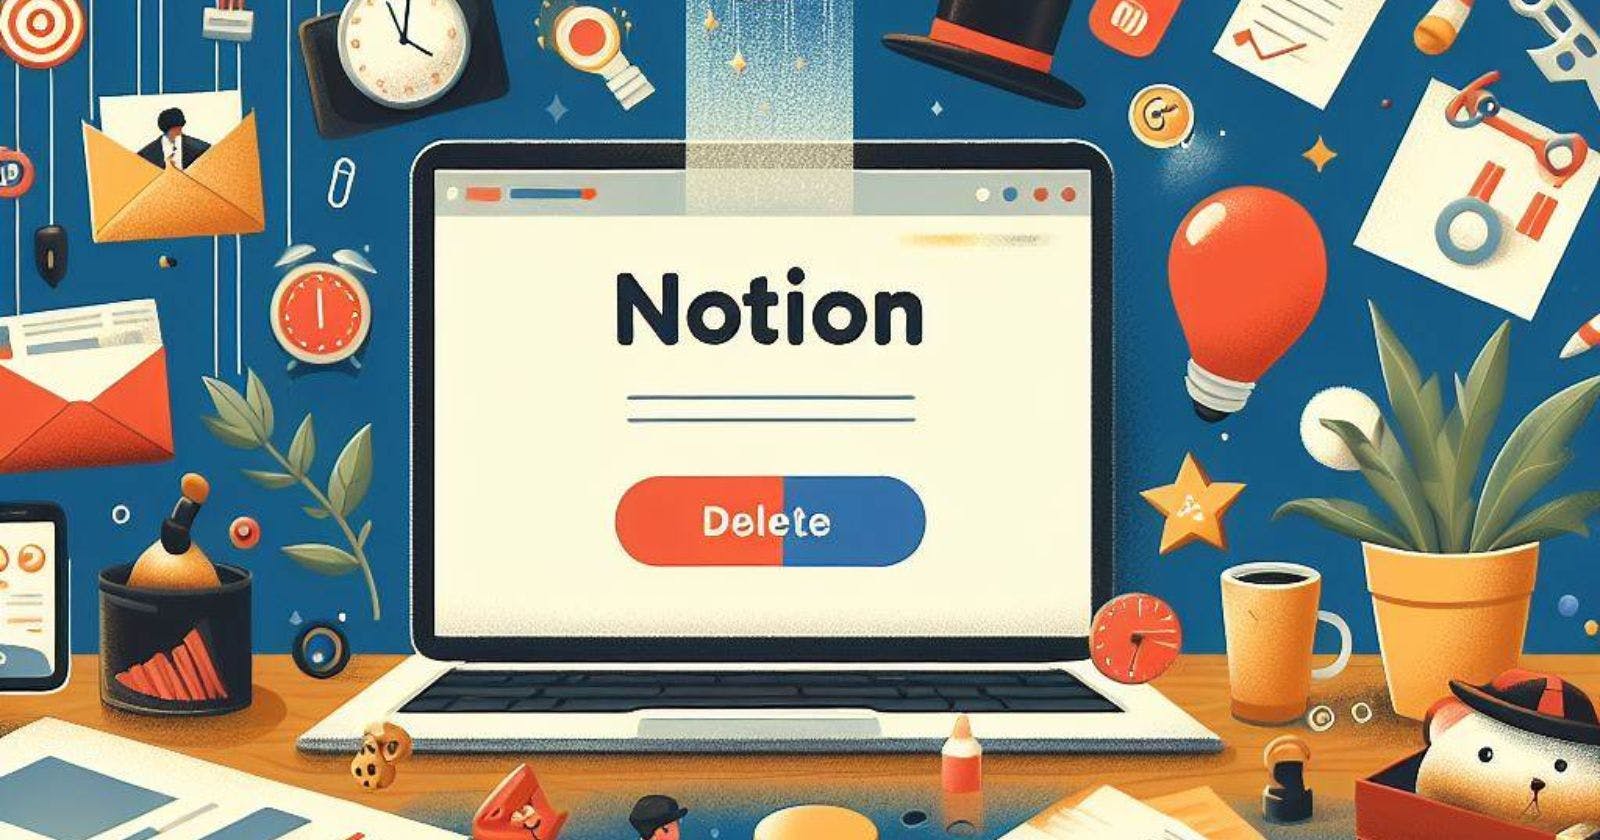 How to Delete Your Notion Account: A Step-by-Step Guide